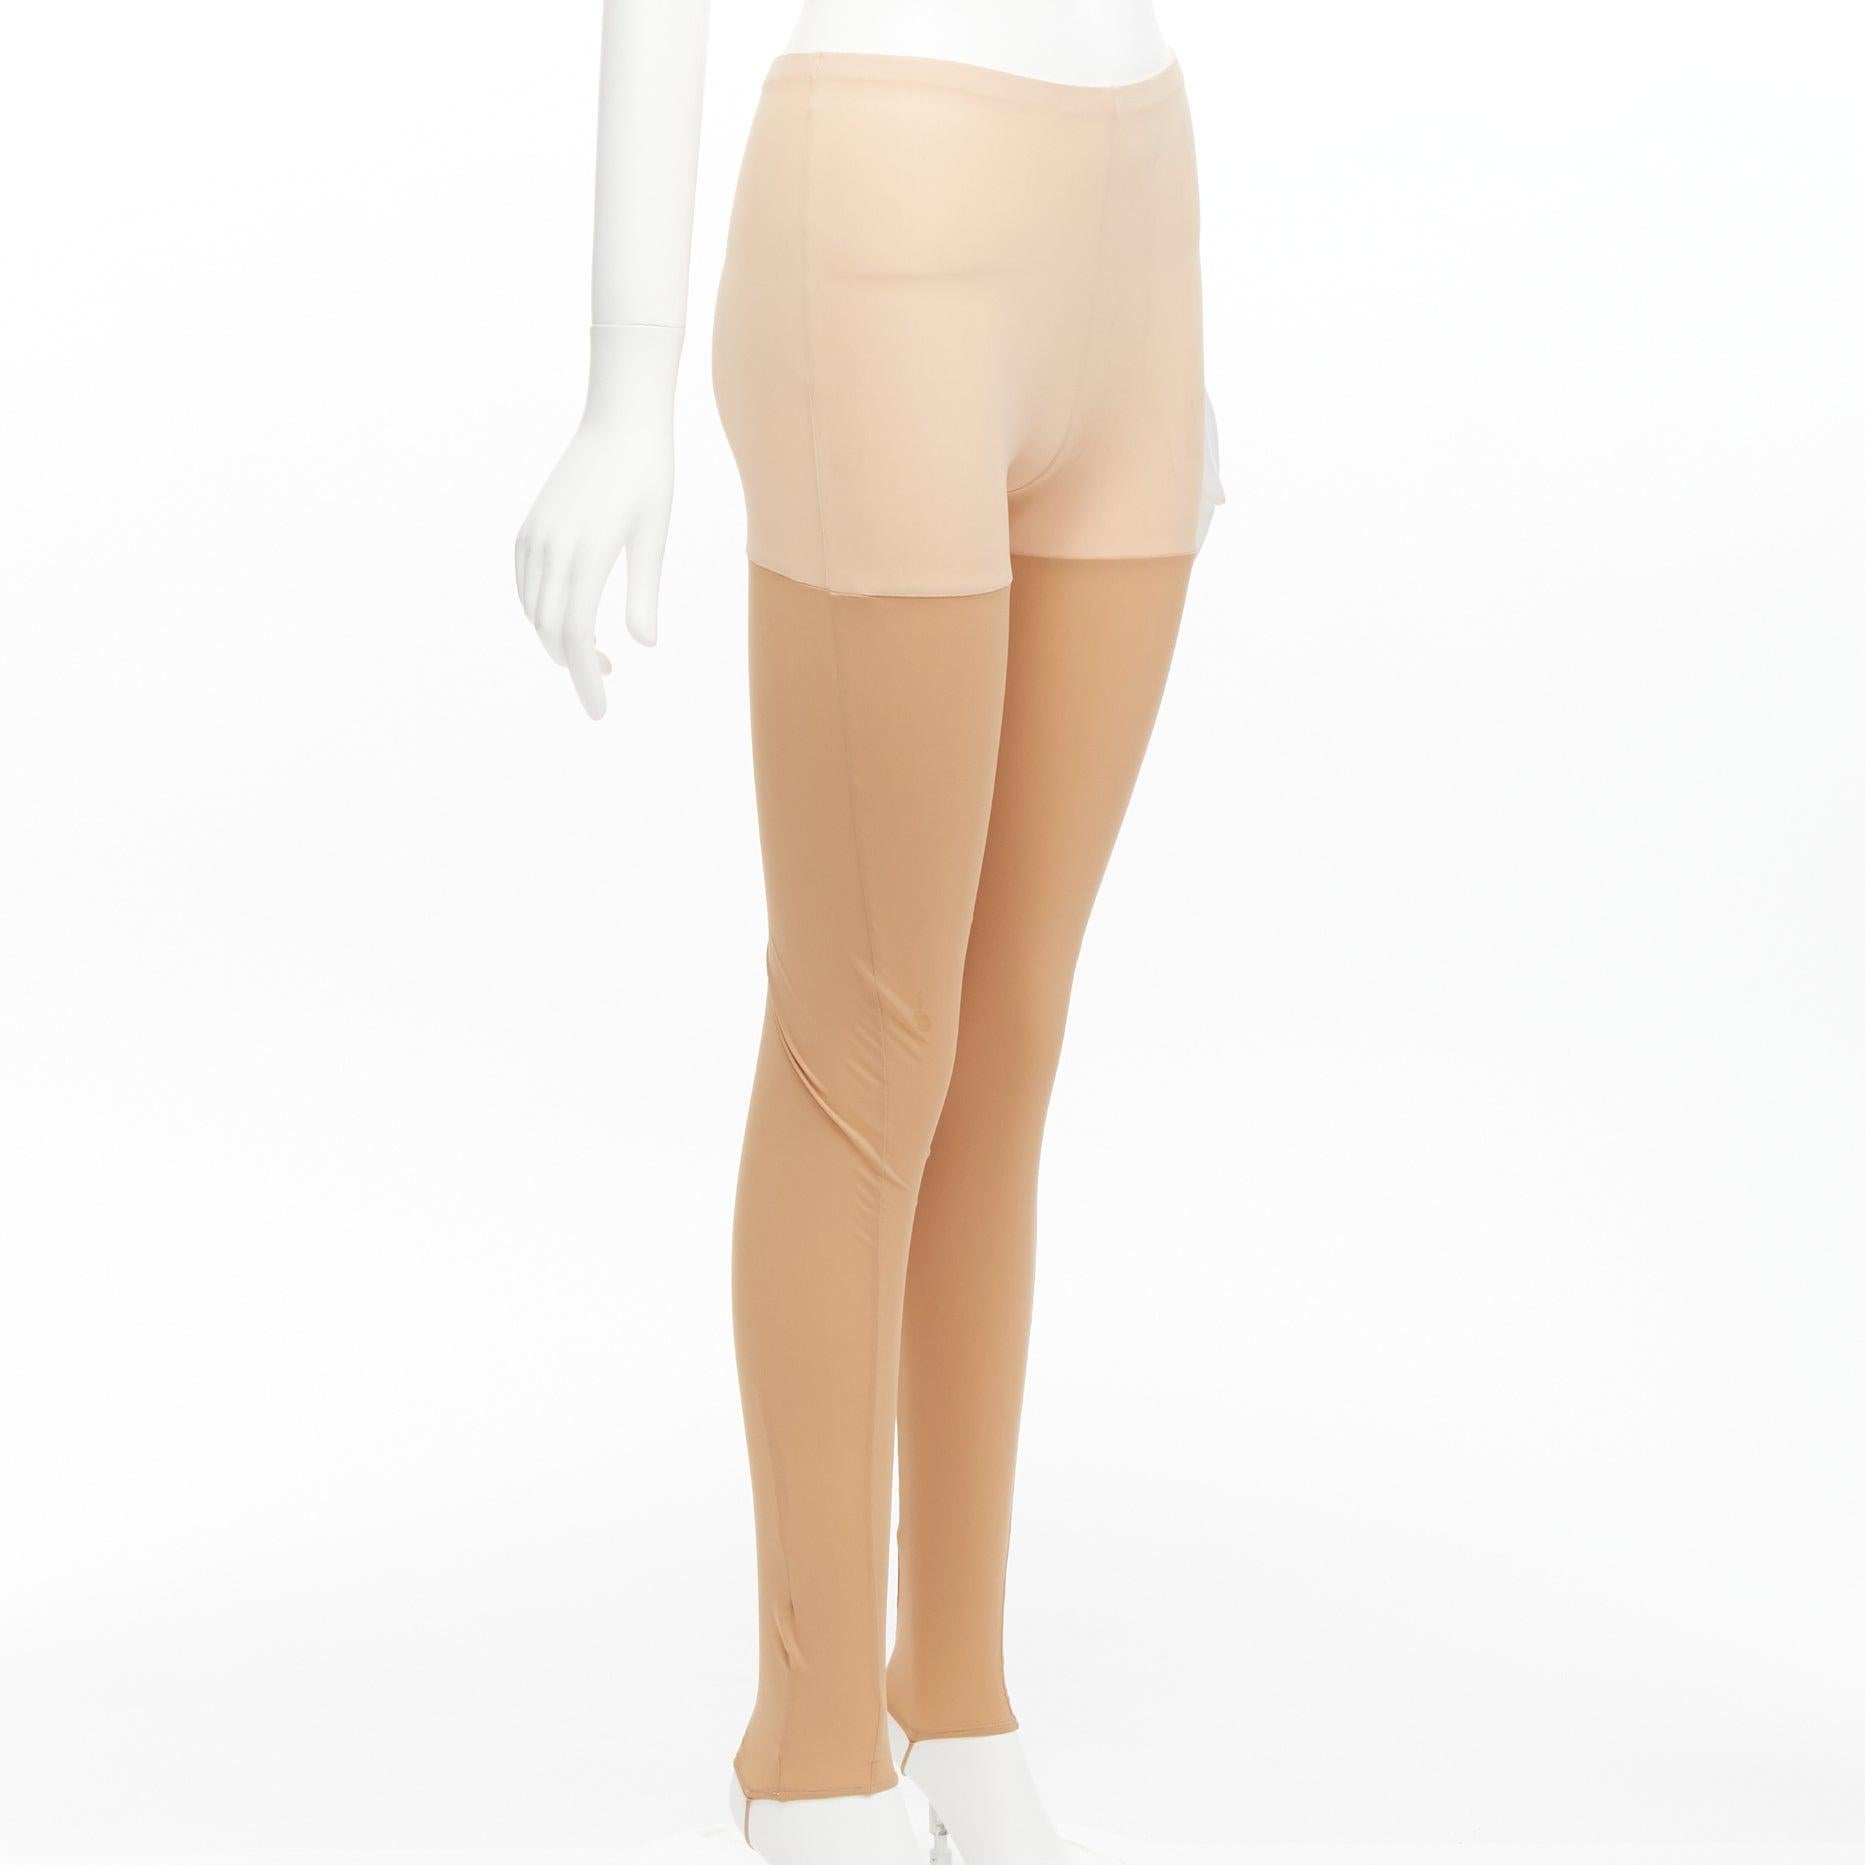 new MAISON MARGIELA 2011 nude bicolor panels skinny tight stir up leggings FR38 M
Reference: BSHW/A00048
Brand: Maison Margiela
Designer: Martin Margiela
Collection: 2011
Material: Polyamide, Blend
Color: Nude
Pattern: Solid
Closure: